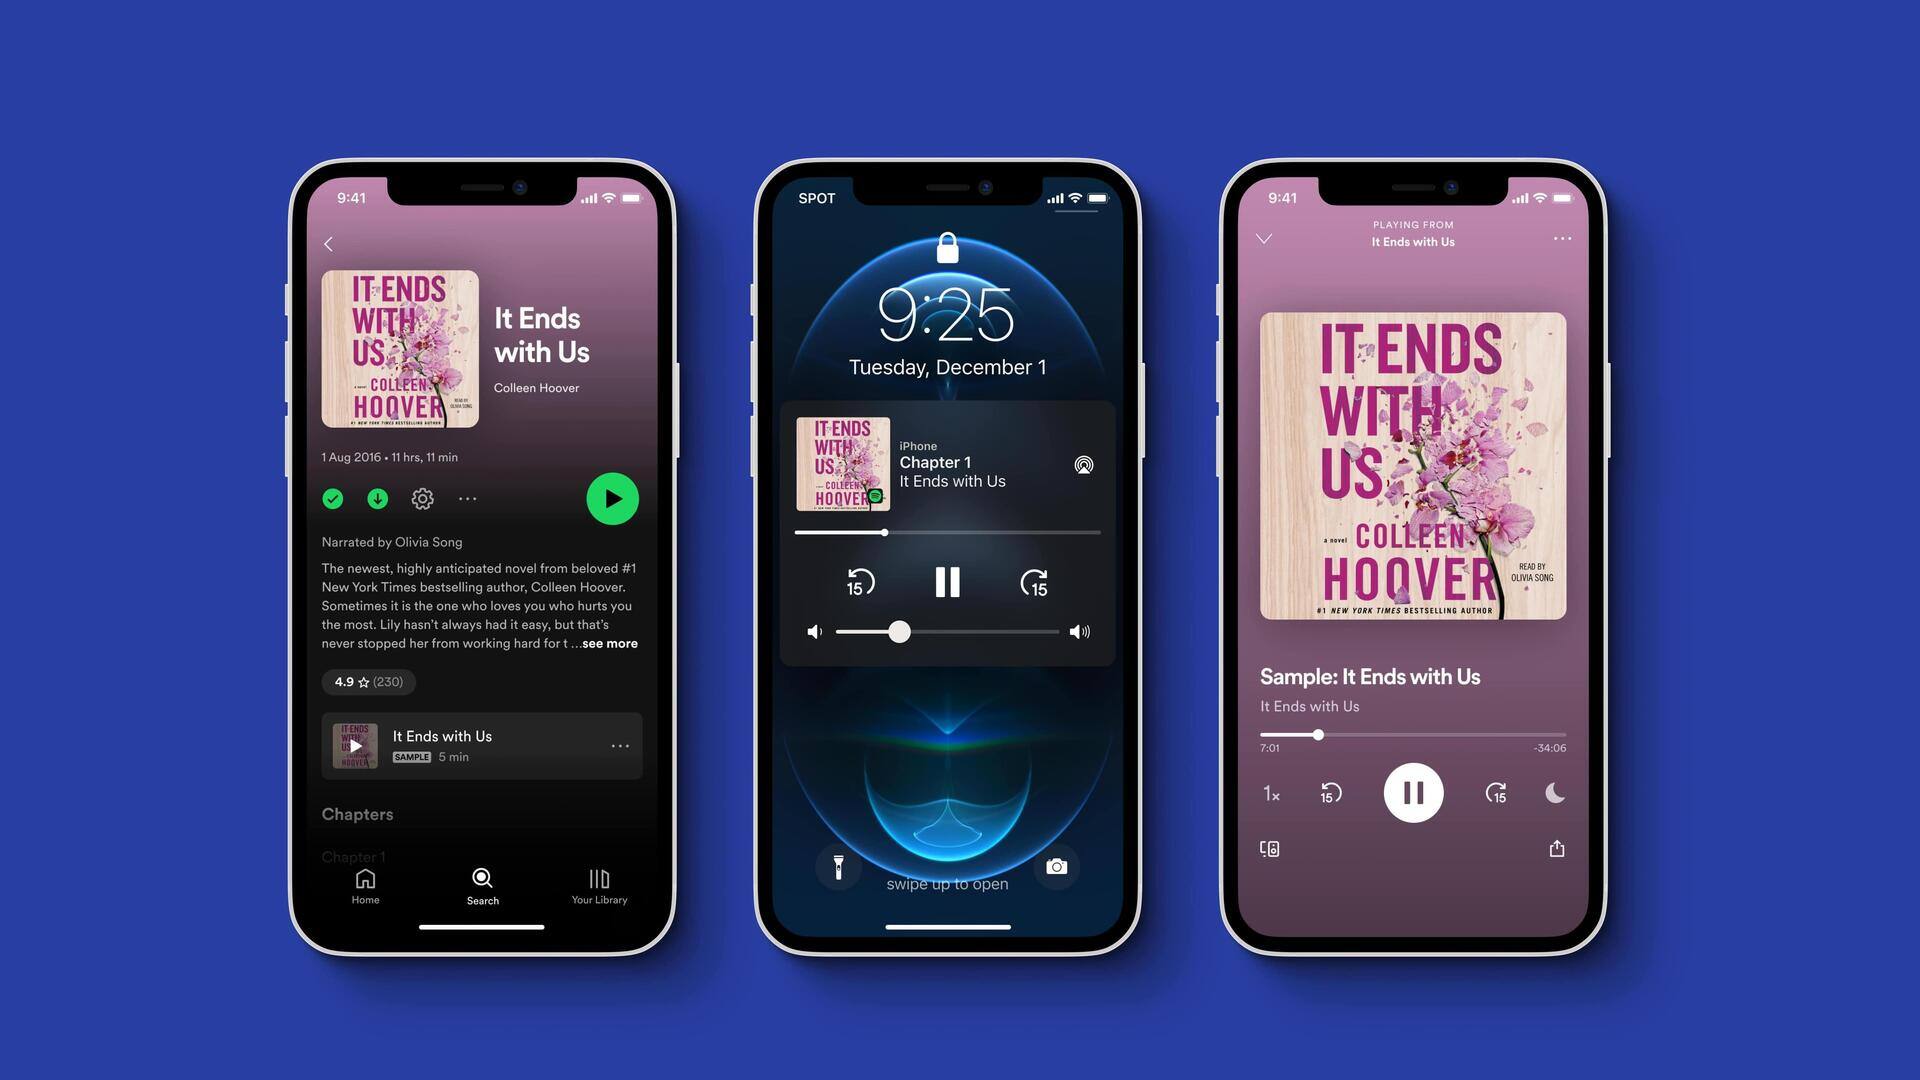 Spotify Premium users get free access to over 150,000 audiobooks